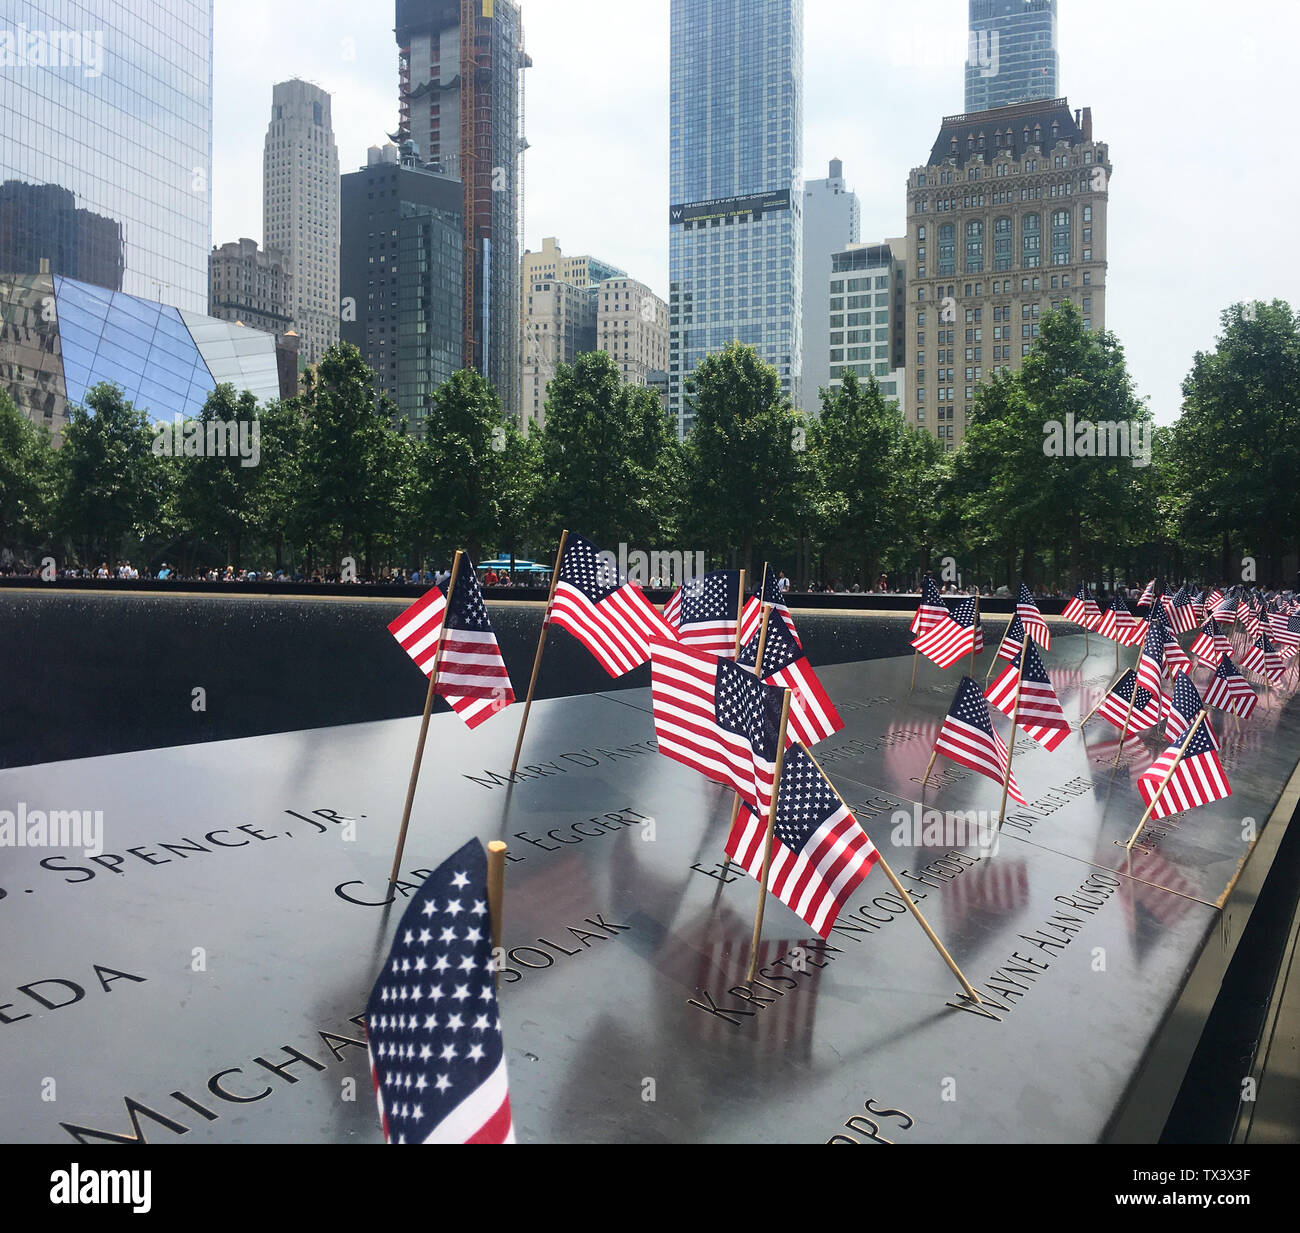 4th July memorial flags at the National 9 11 Memorial & Museum, New York City, New York, USA Stock Photo